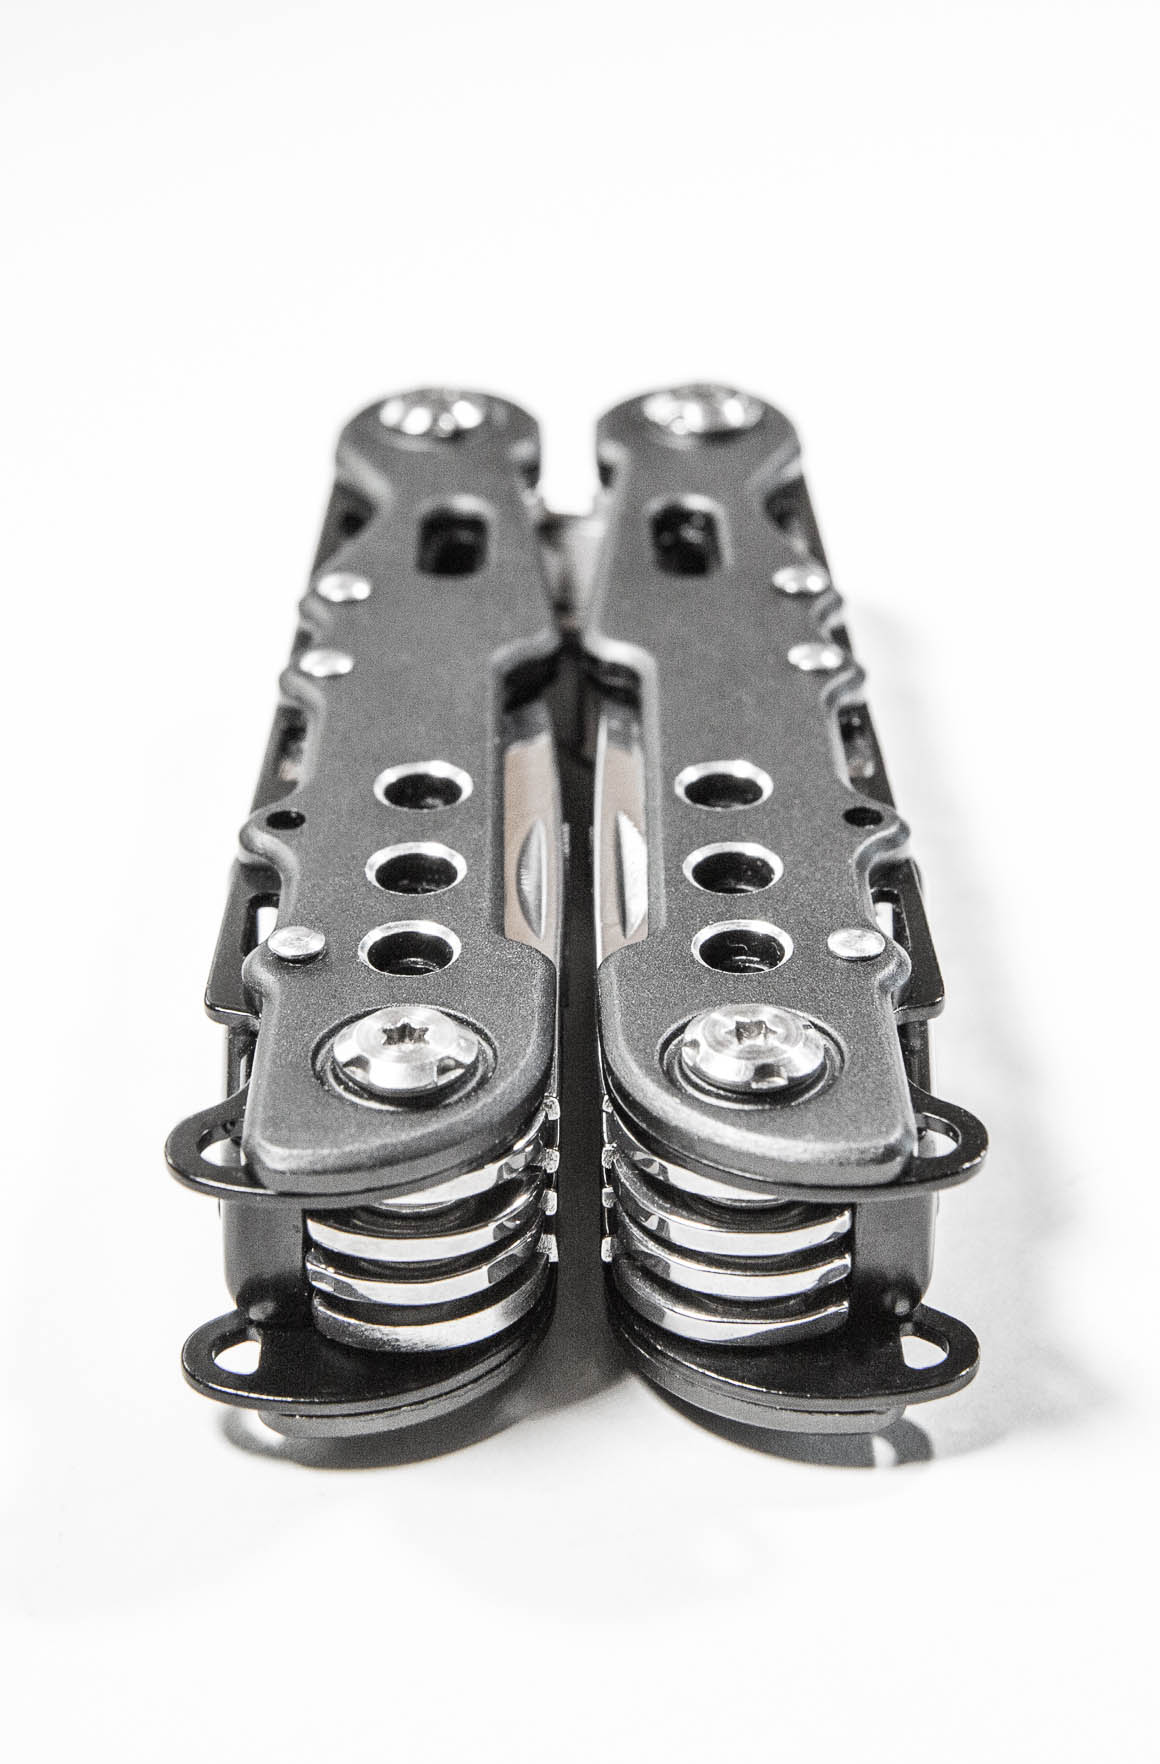 The Cerberuso 13-in-1 Multi-Tool has the ability to turn int'